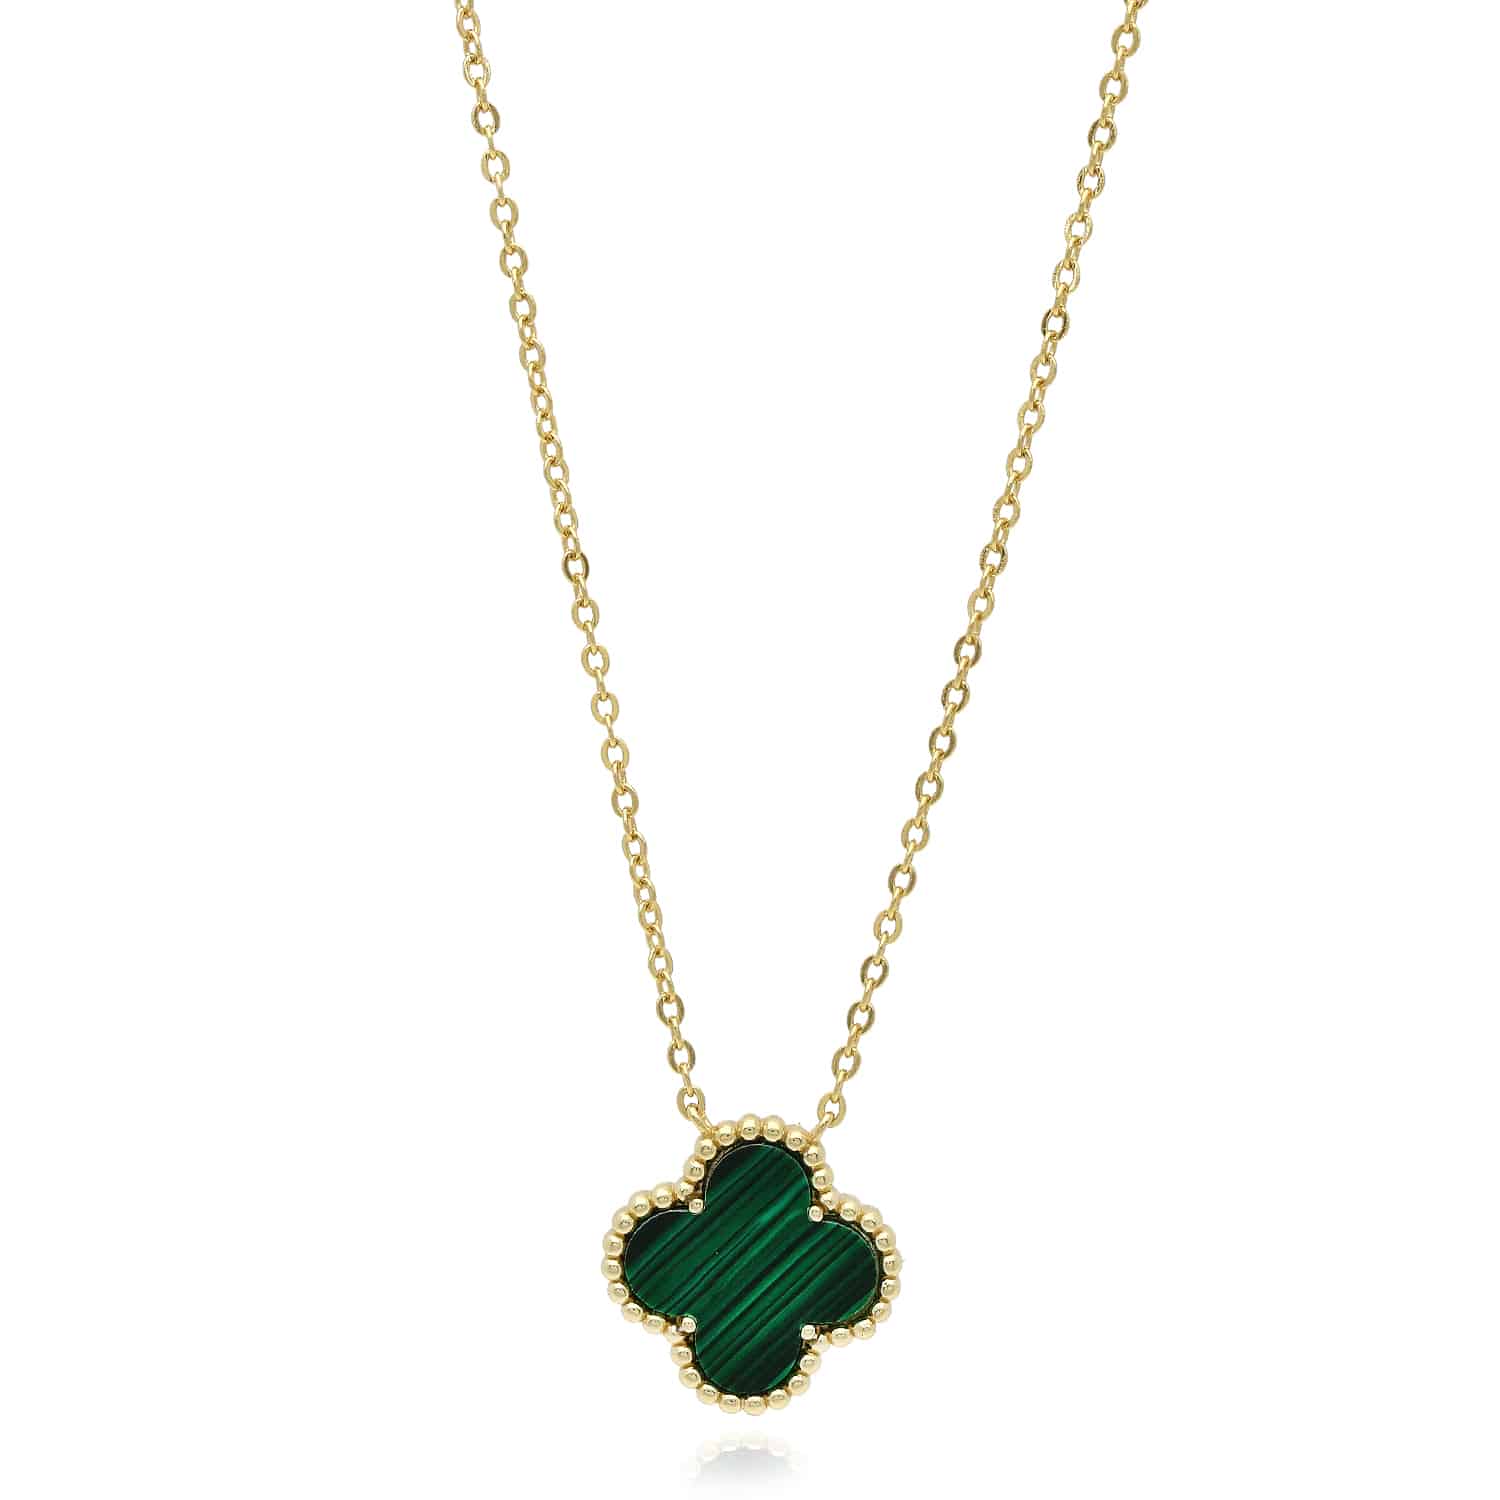 Yellow Gold Over Silver Gemstone Clover Leaf Pendant Necklace 16"-18" Adjustable - Malachite